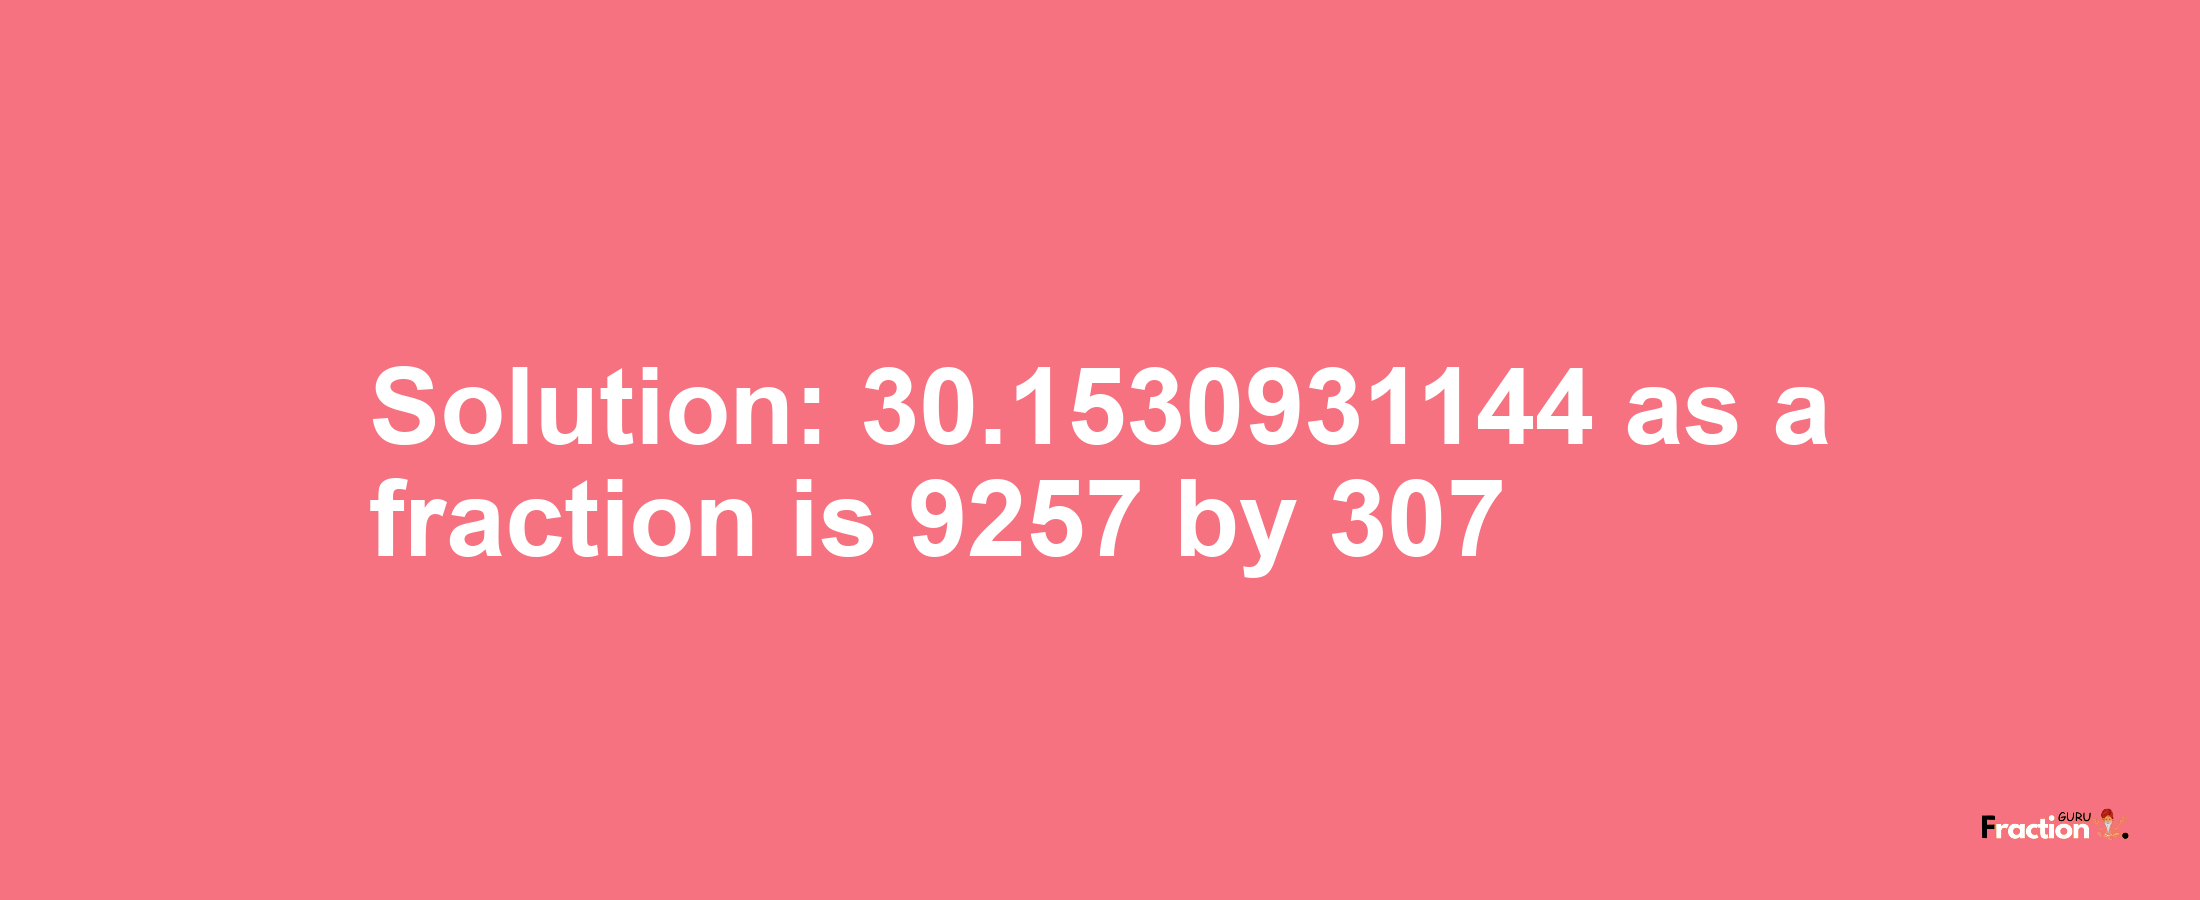 Solution:30.1530931144 as a fraction is 9257/307